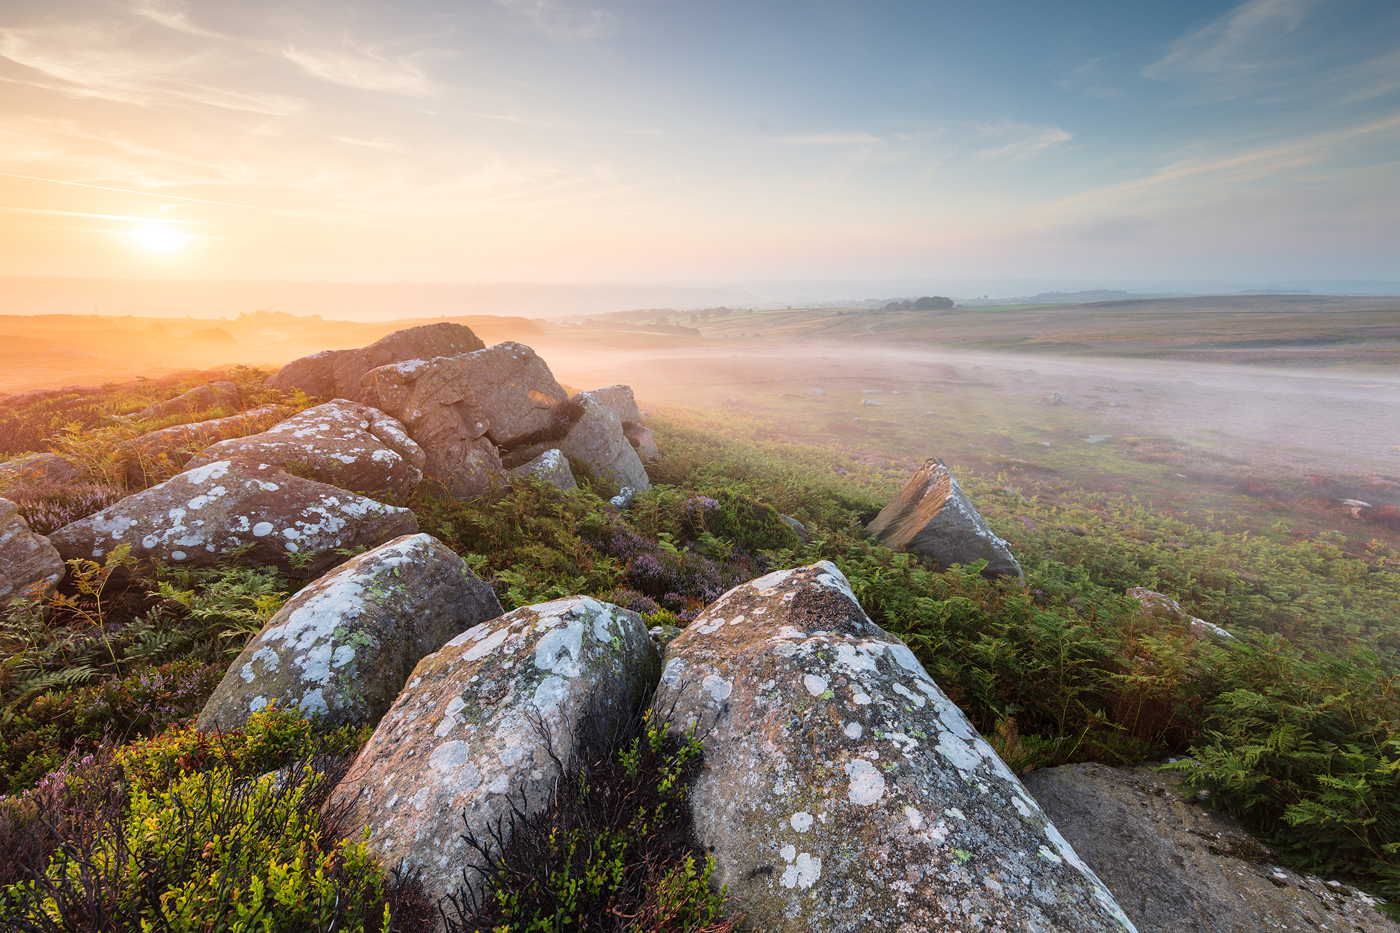 An intense sunrise bathes North Yorkshire moorland in soft light. Lichen-speckled rocks and heather streak the foreground, while a misty expanse stretches towards a hazy horizon. a rocky landscape with a valley in the background